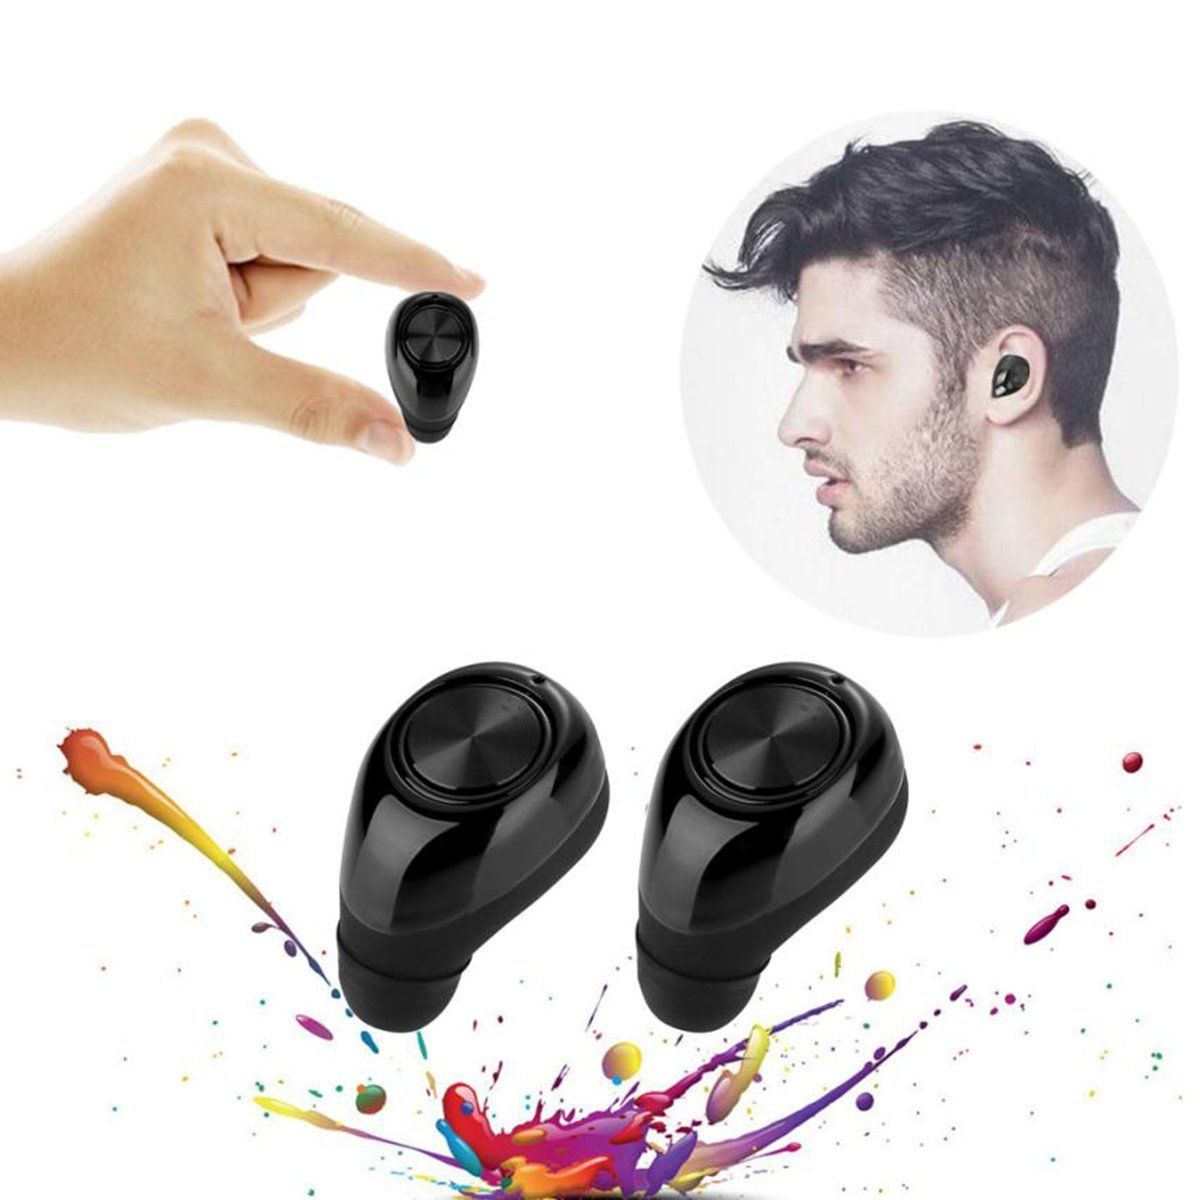 

Mini True Wireless Earbuds Bluetooth V4.1 Stereo Headphone CVC6.0 Noise Cancelling with Mic